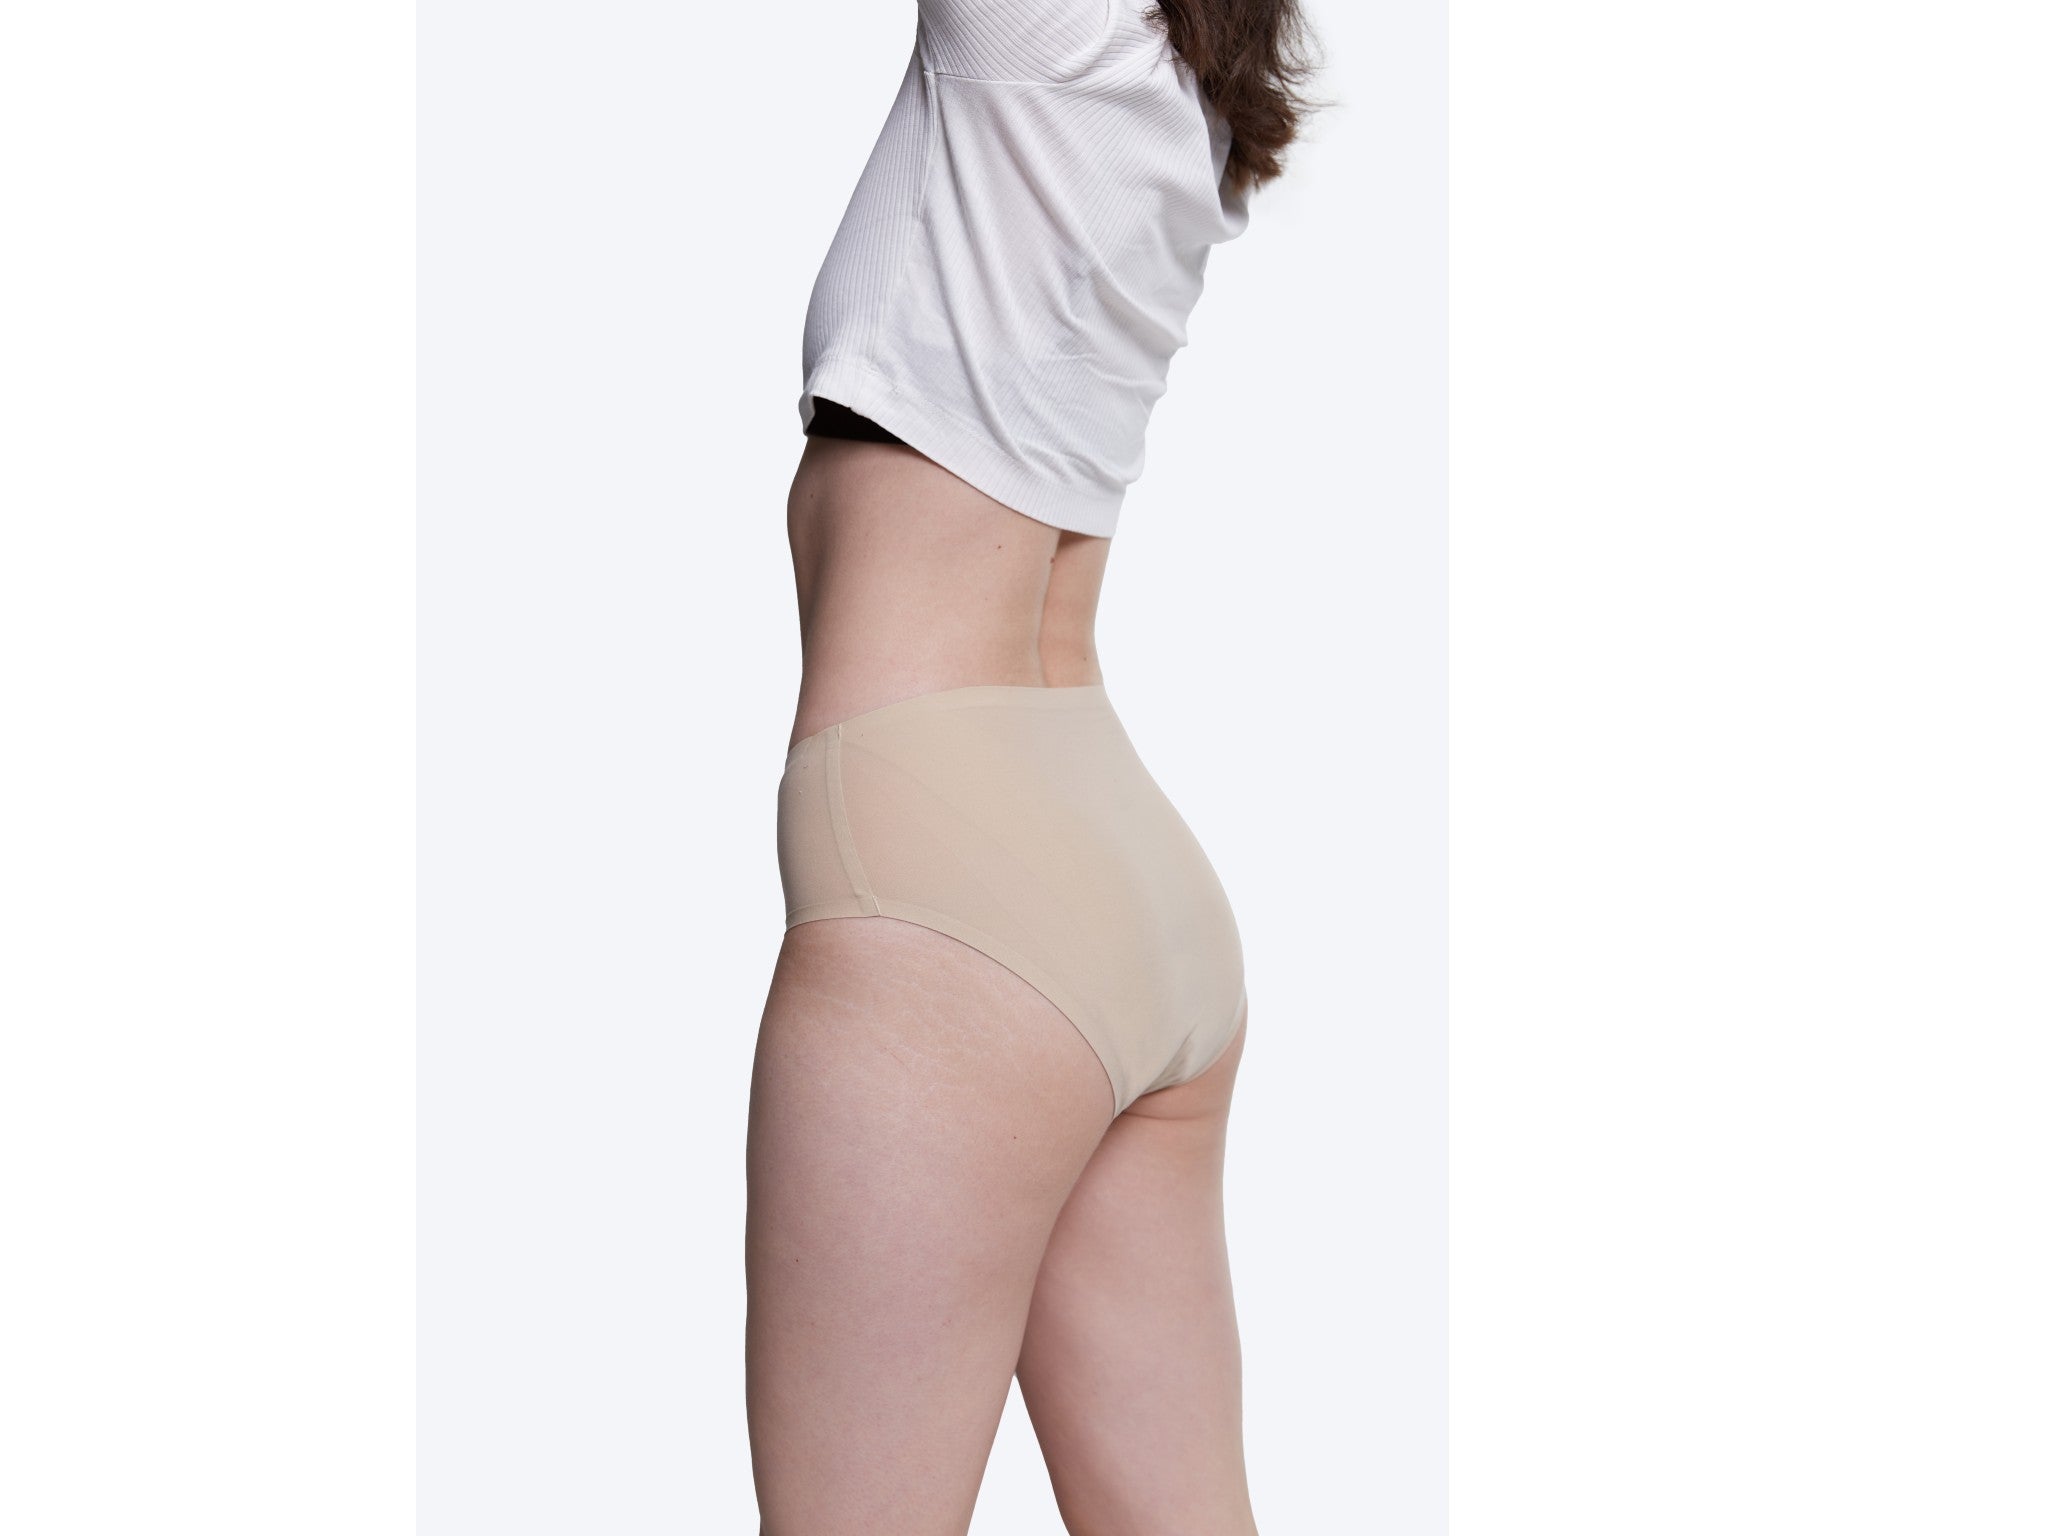 Teen Stretch ™ Seamless Period Pants